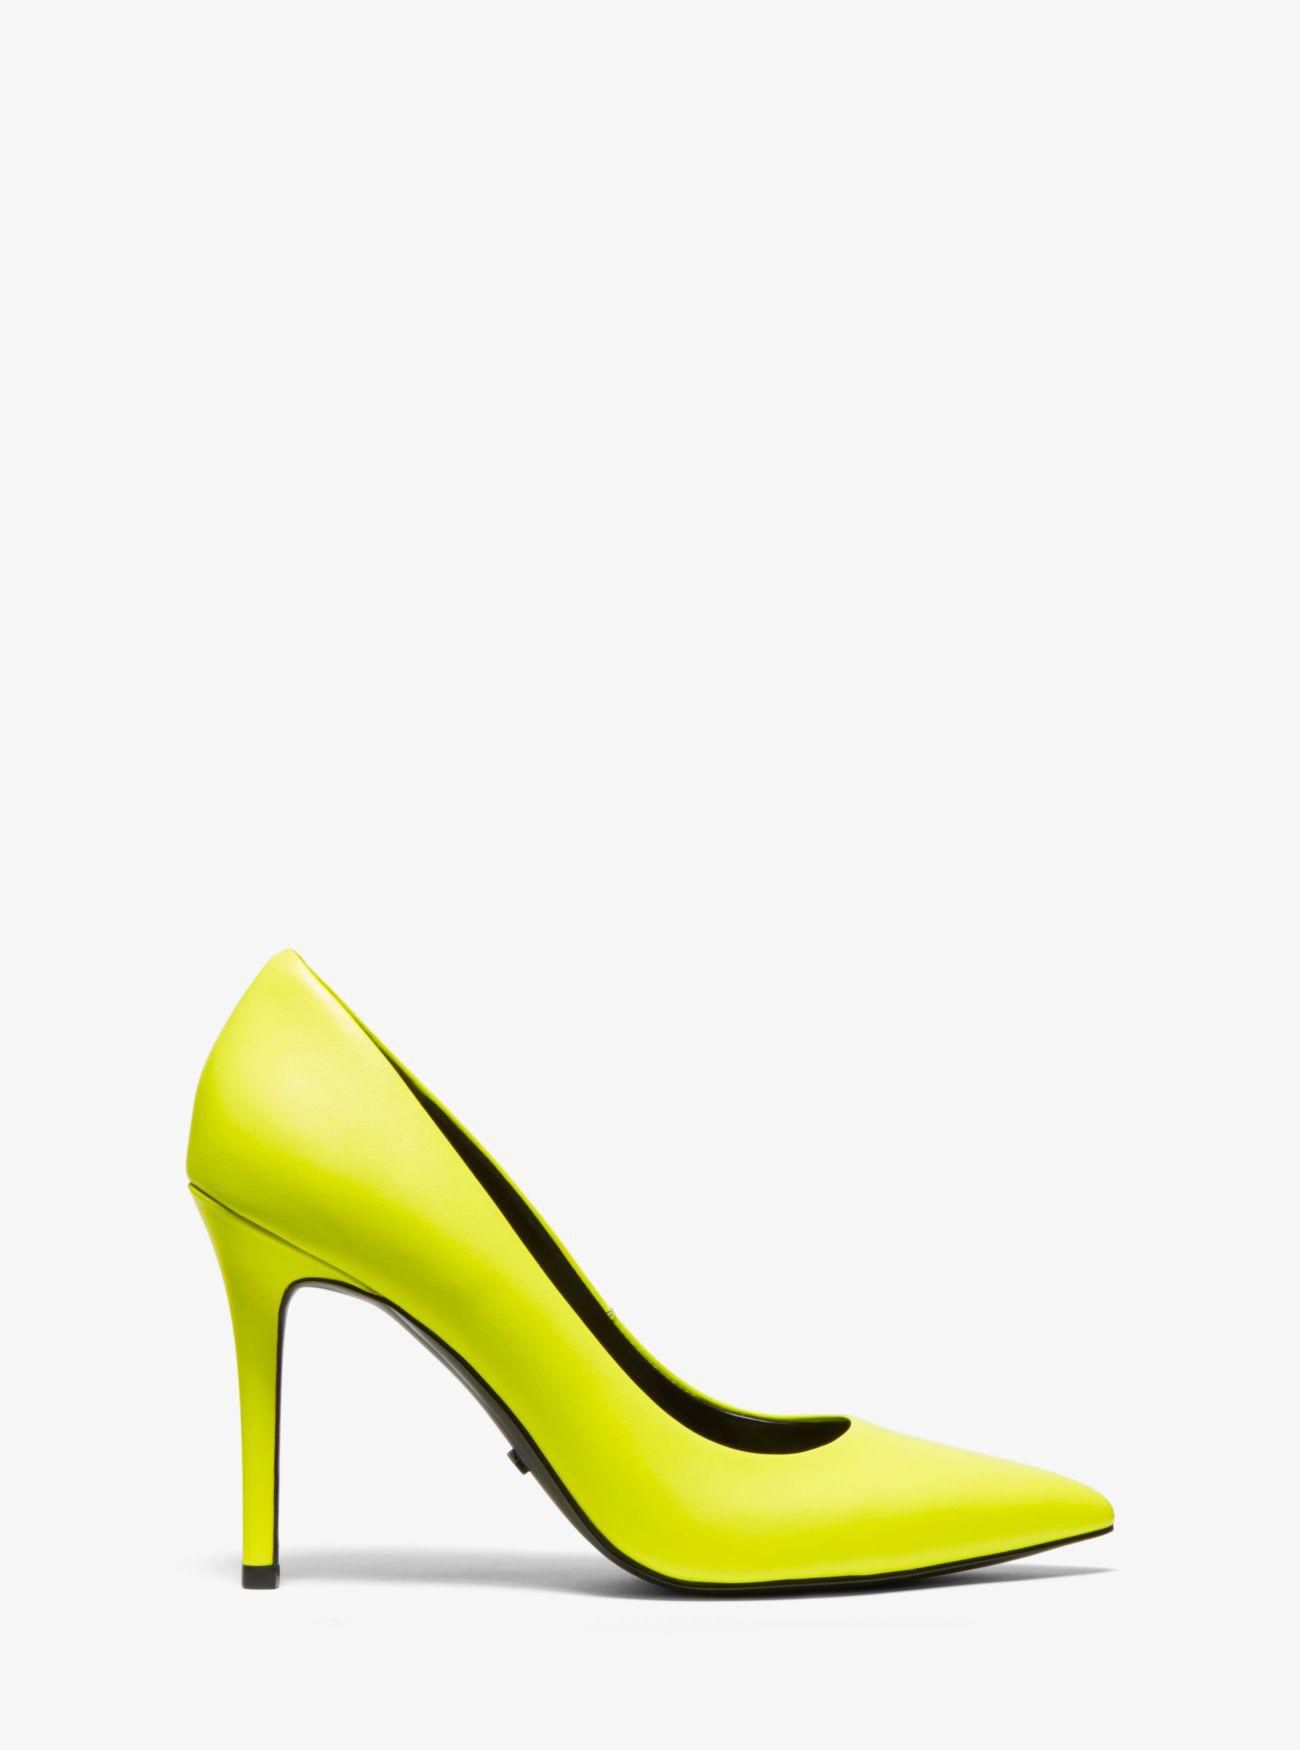 NWT michael kors women shoes size 8.5 Neon Yellow Claire Pointy Toe Leather pump